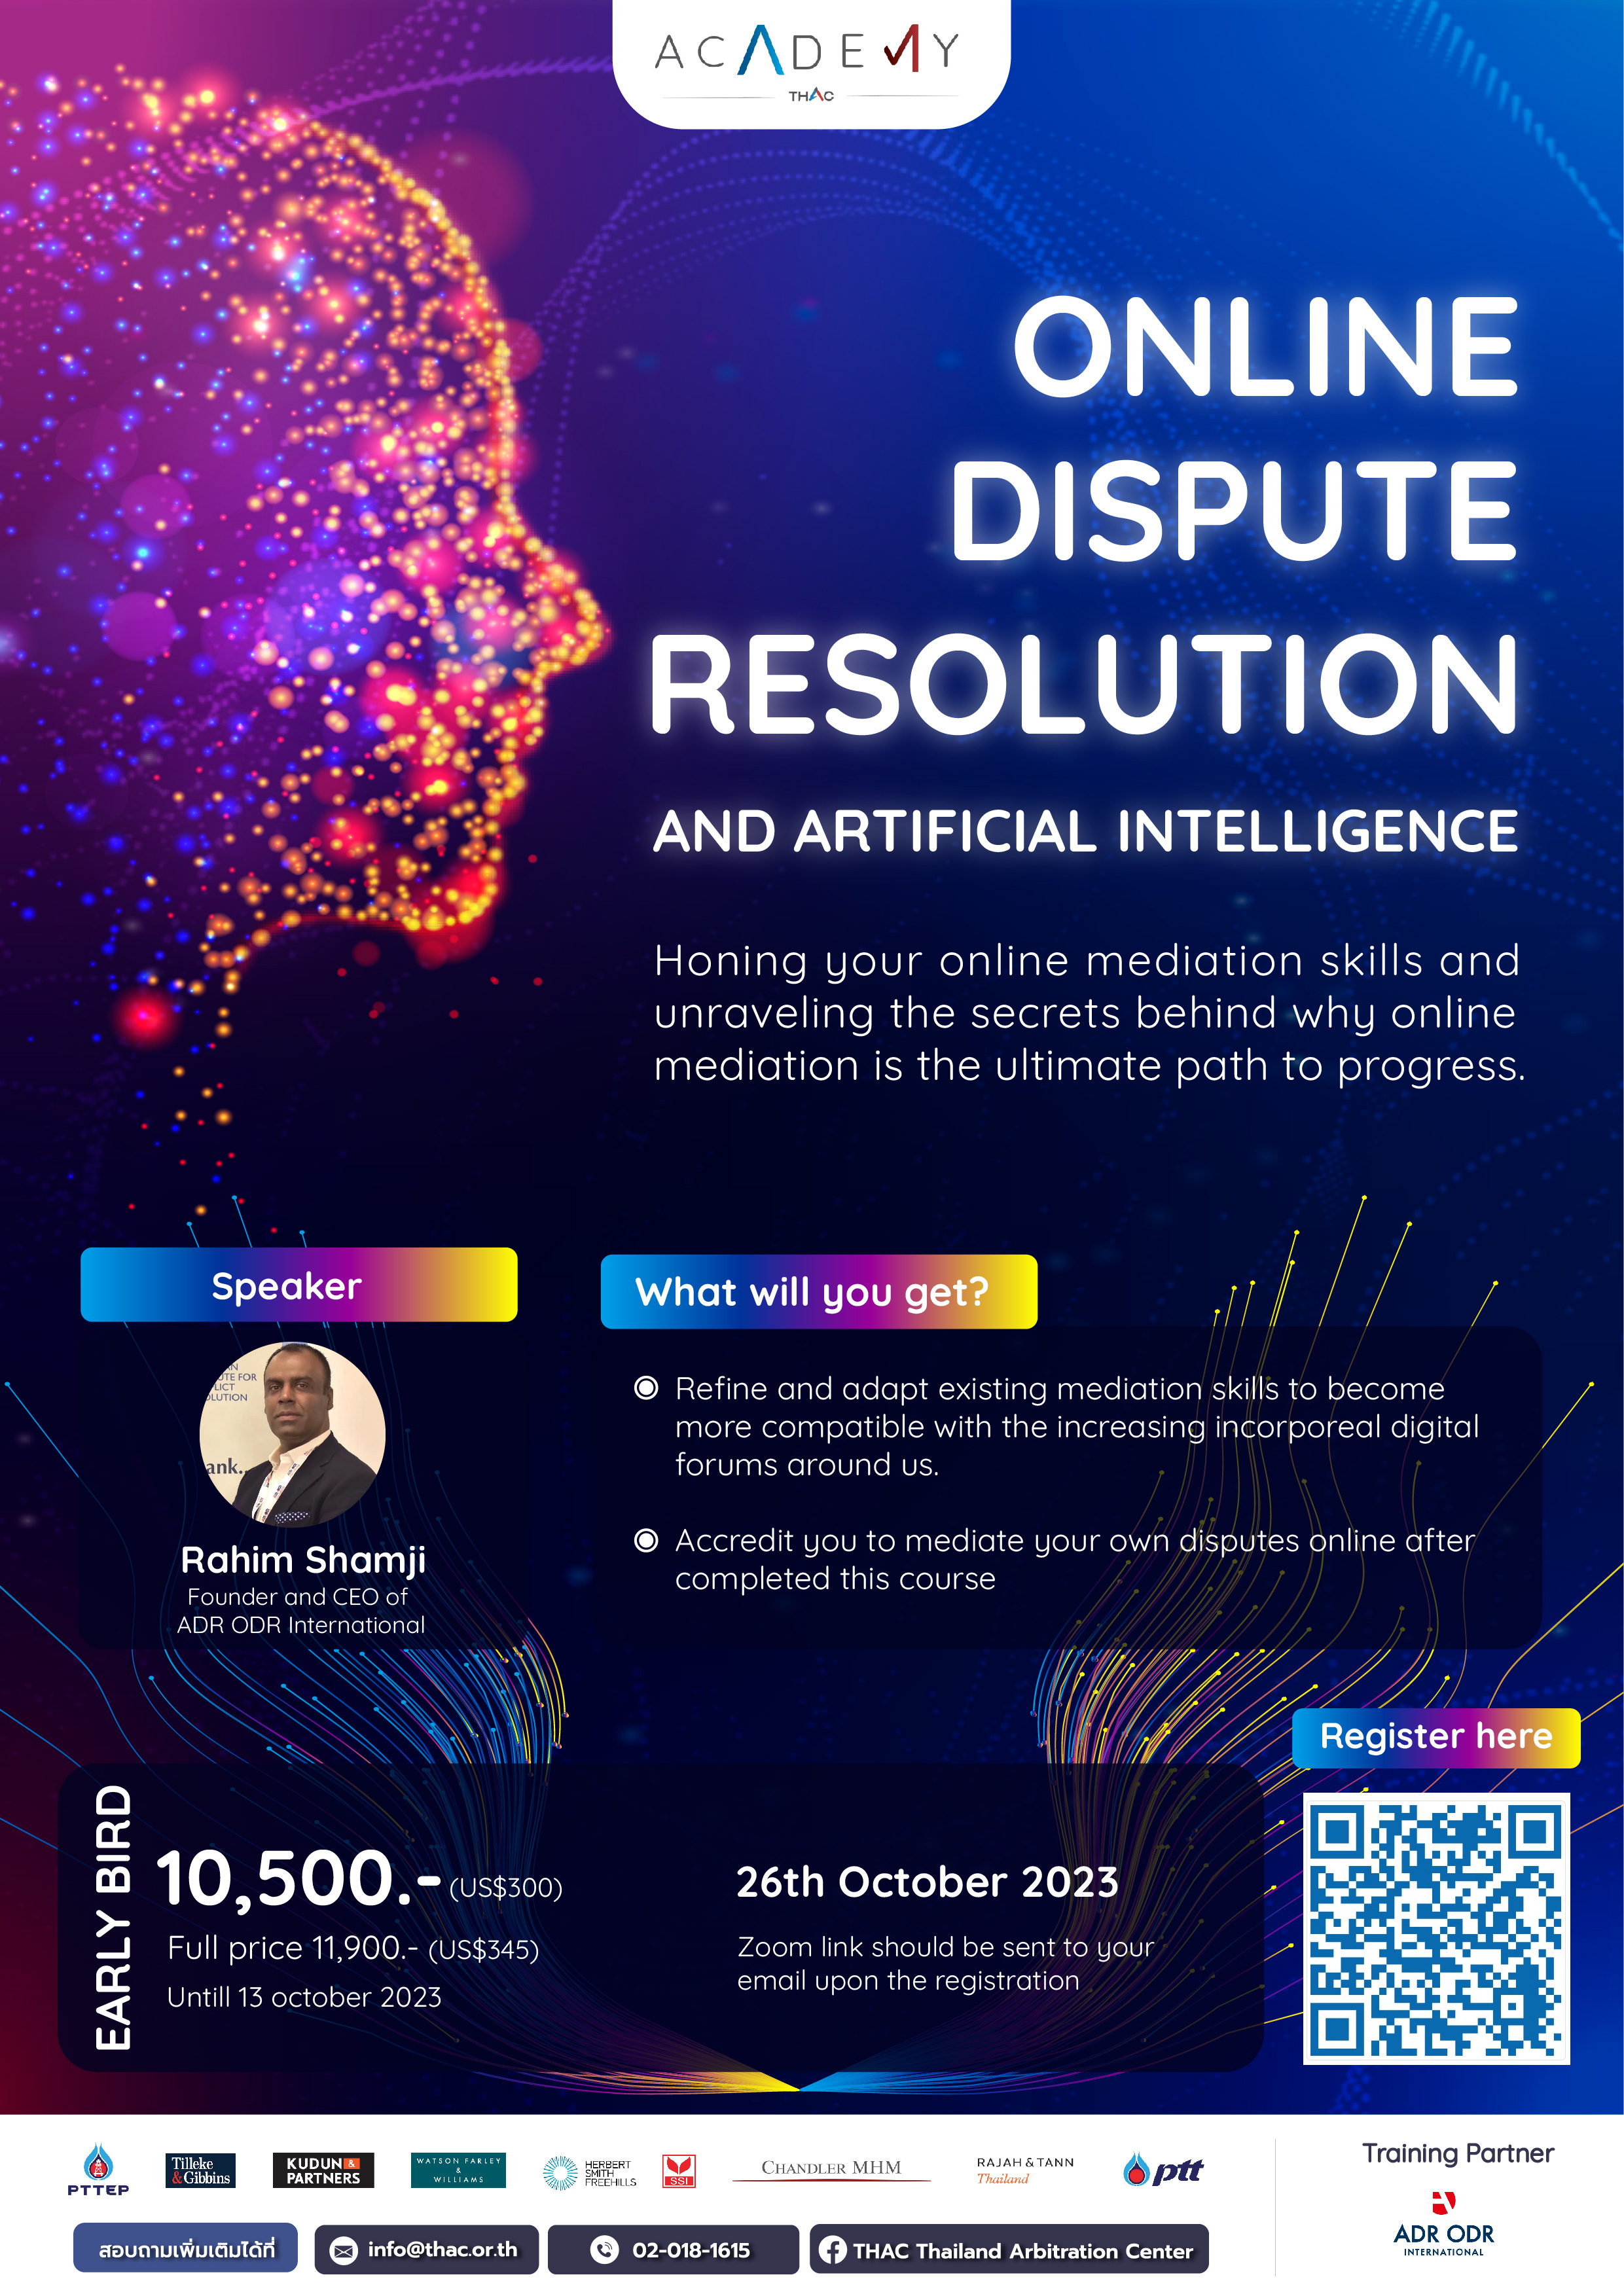 Online dispute resolution and artificial intelligence